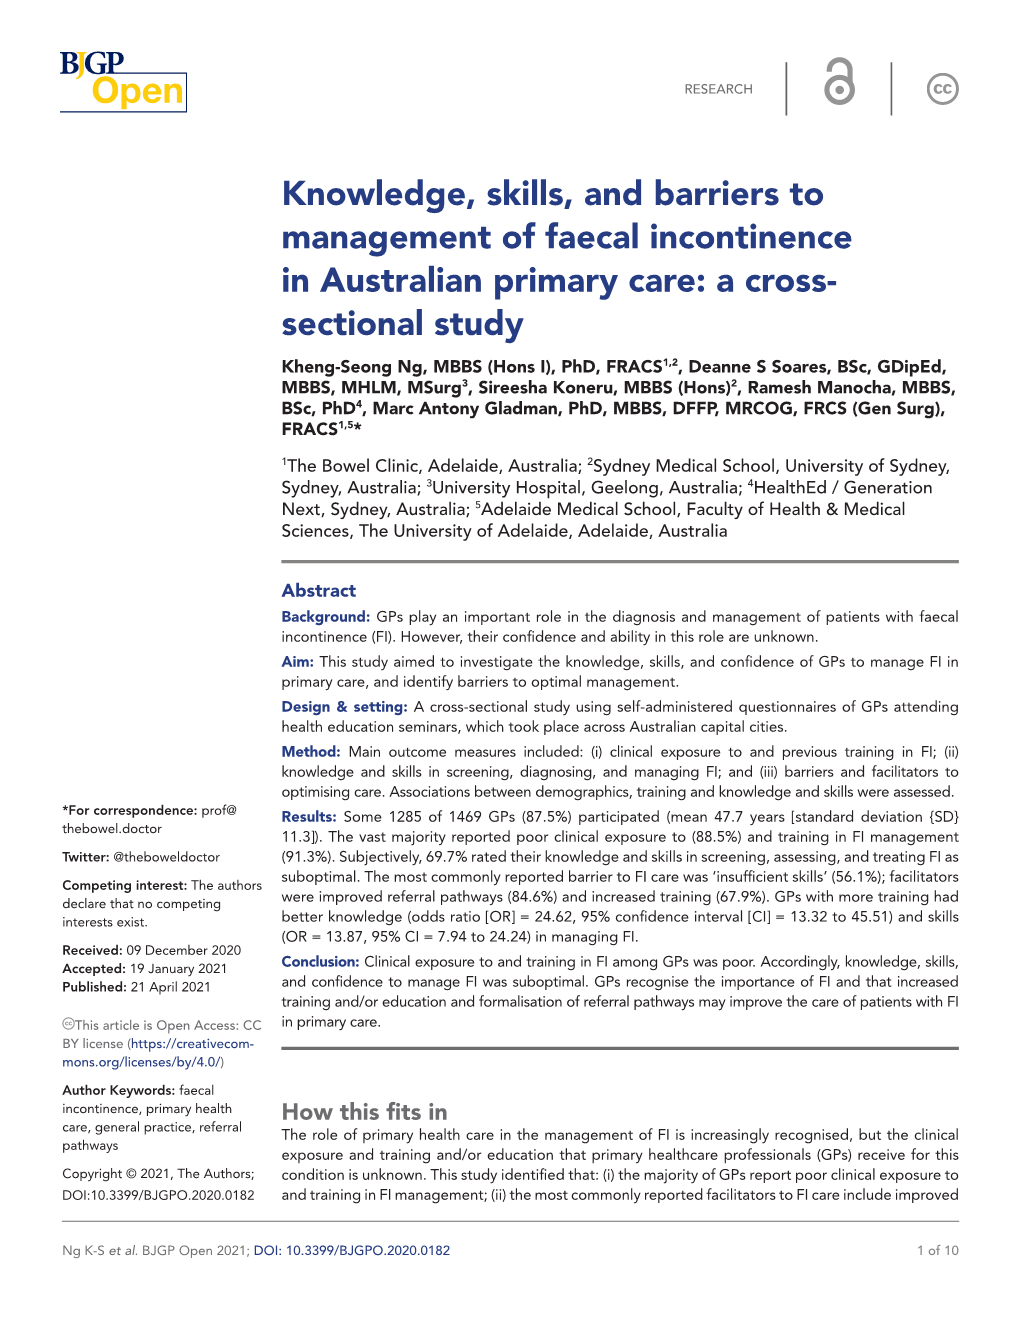 Knowledge, Skills, and Barriers to Management of Faecal Incontinence in Australian Primary Care